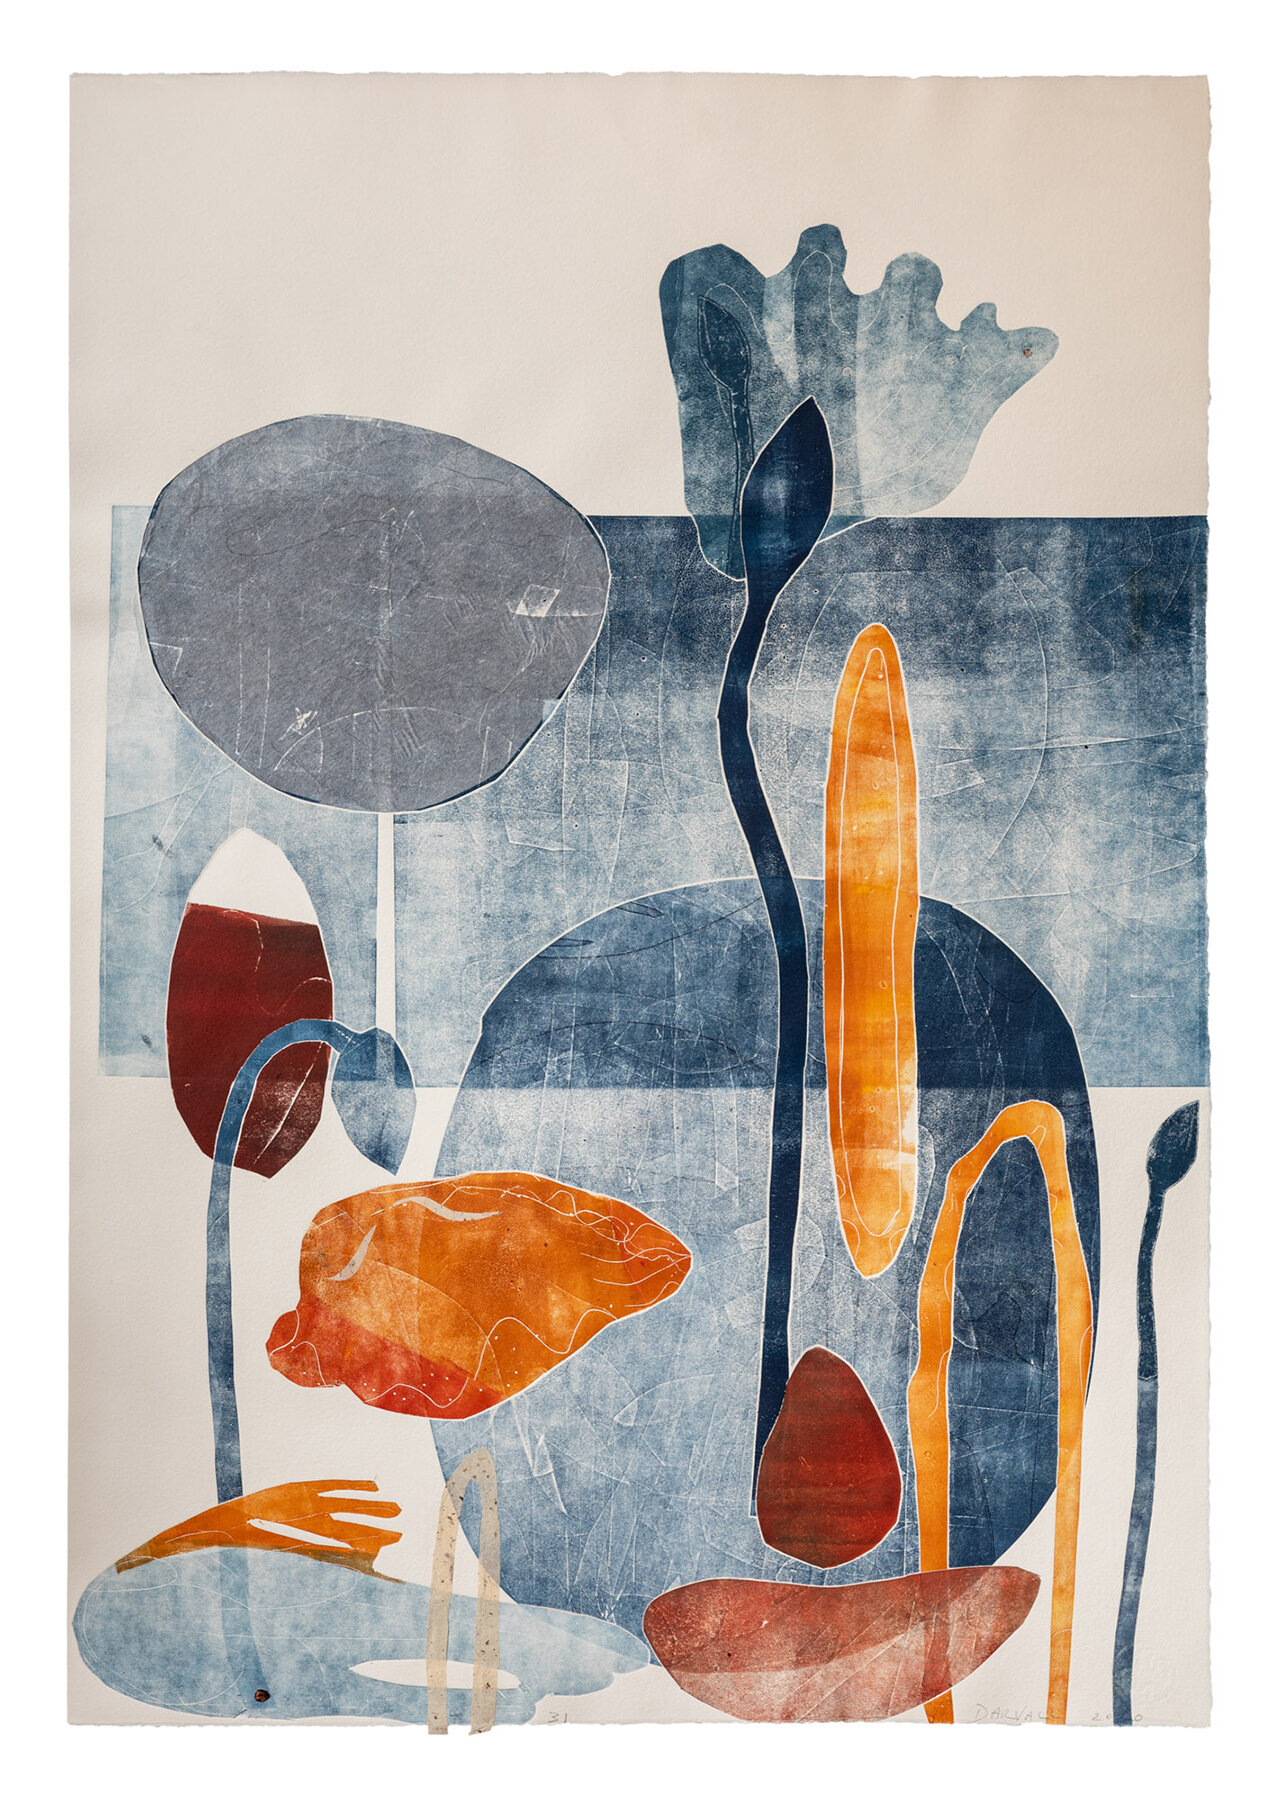   Winged Realm no 31 , 2021, 78 x 55.5 cm, Monoprint on chine colle on Hahnemuhle paper  (Provenance Geelong Gallery Collection) 